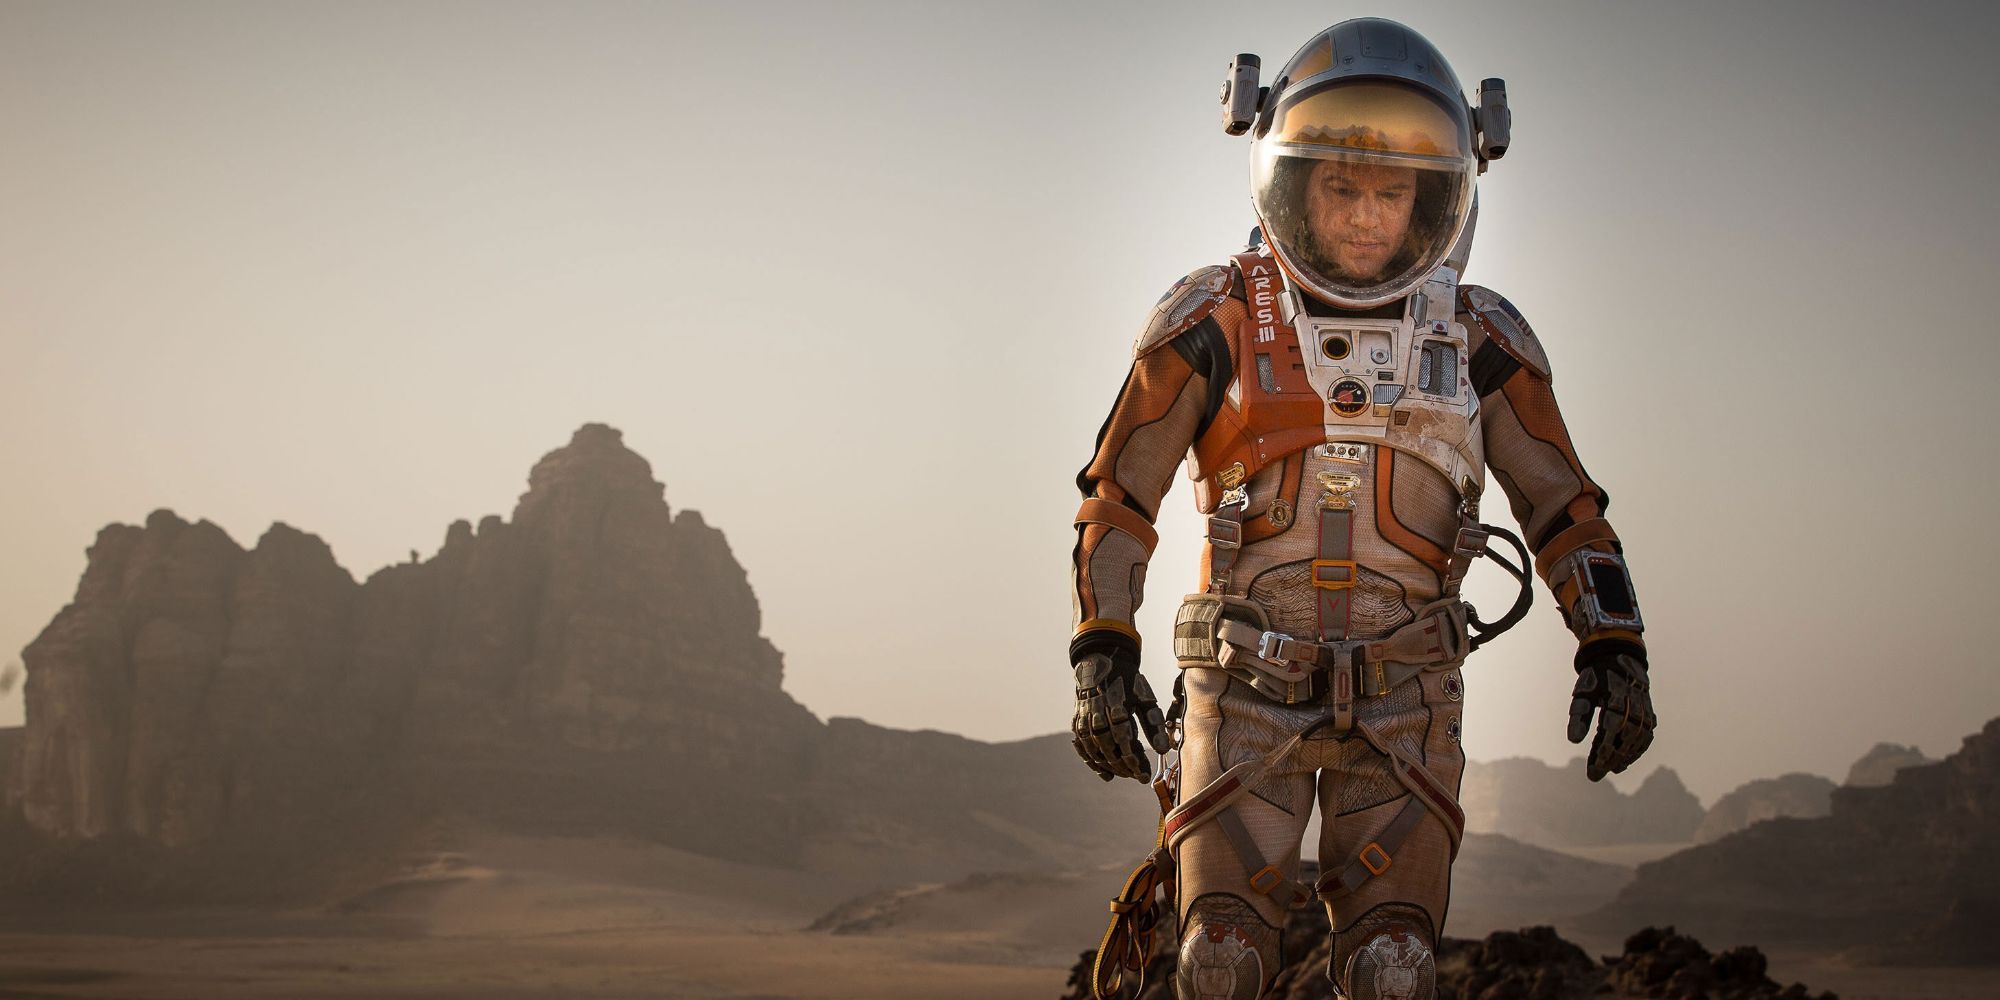 How The Martian Ended The 2010s Best Sci-Fi Movies Trend